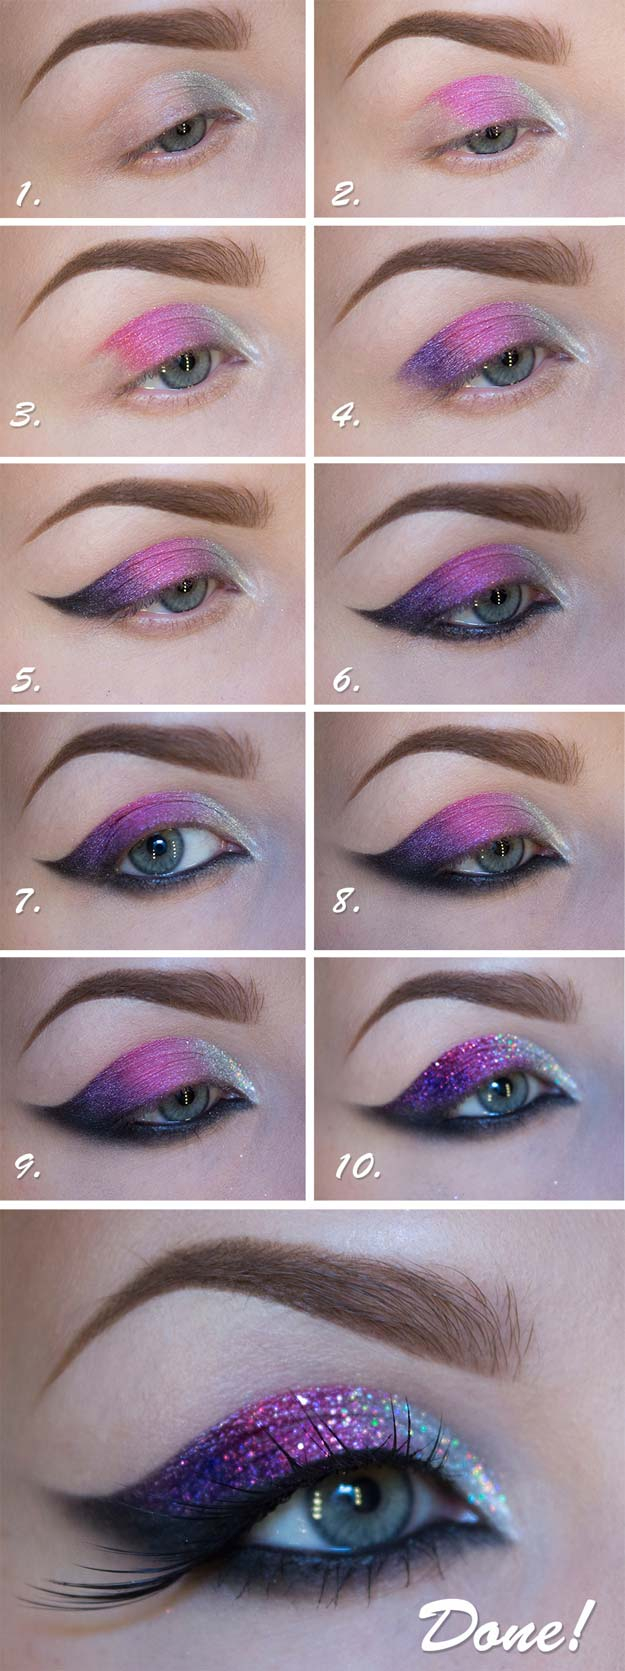 Prom Makeup Blue Eyes 38 Makeup Ideas For Prom The Goddess